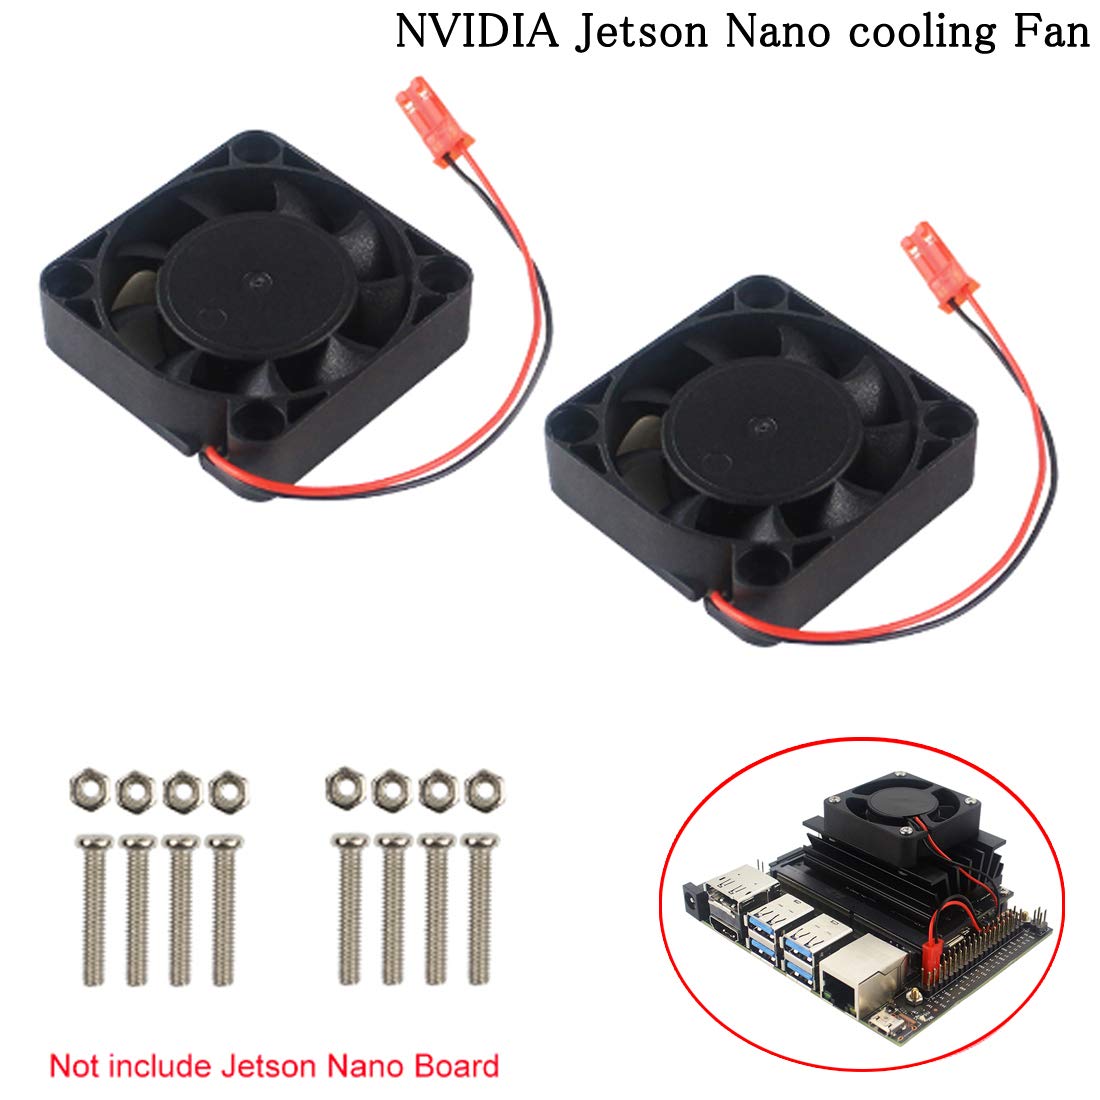 3PIN Reverse-Proof Connector 40mm×40mm×10mm Fan IBest Dedicated DC 5V-12V Cooling Fan for Jetson Nano